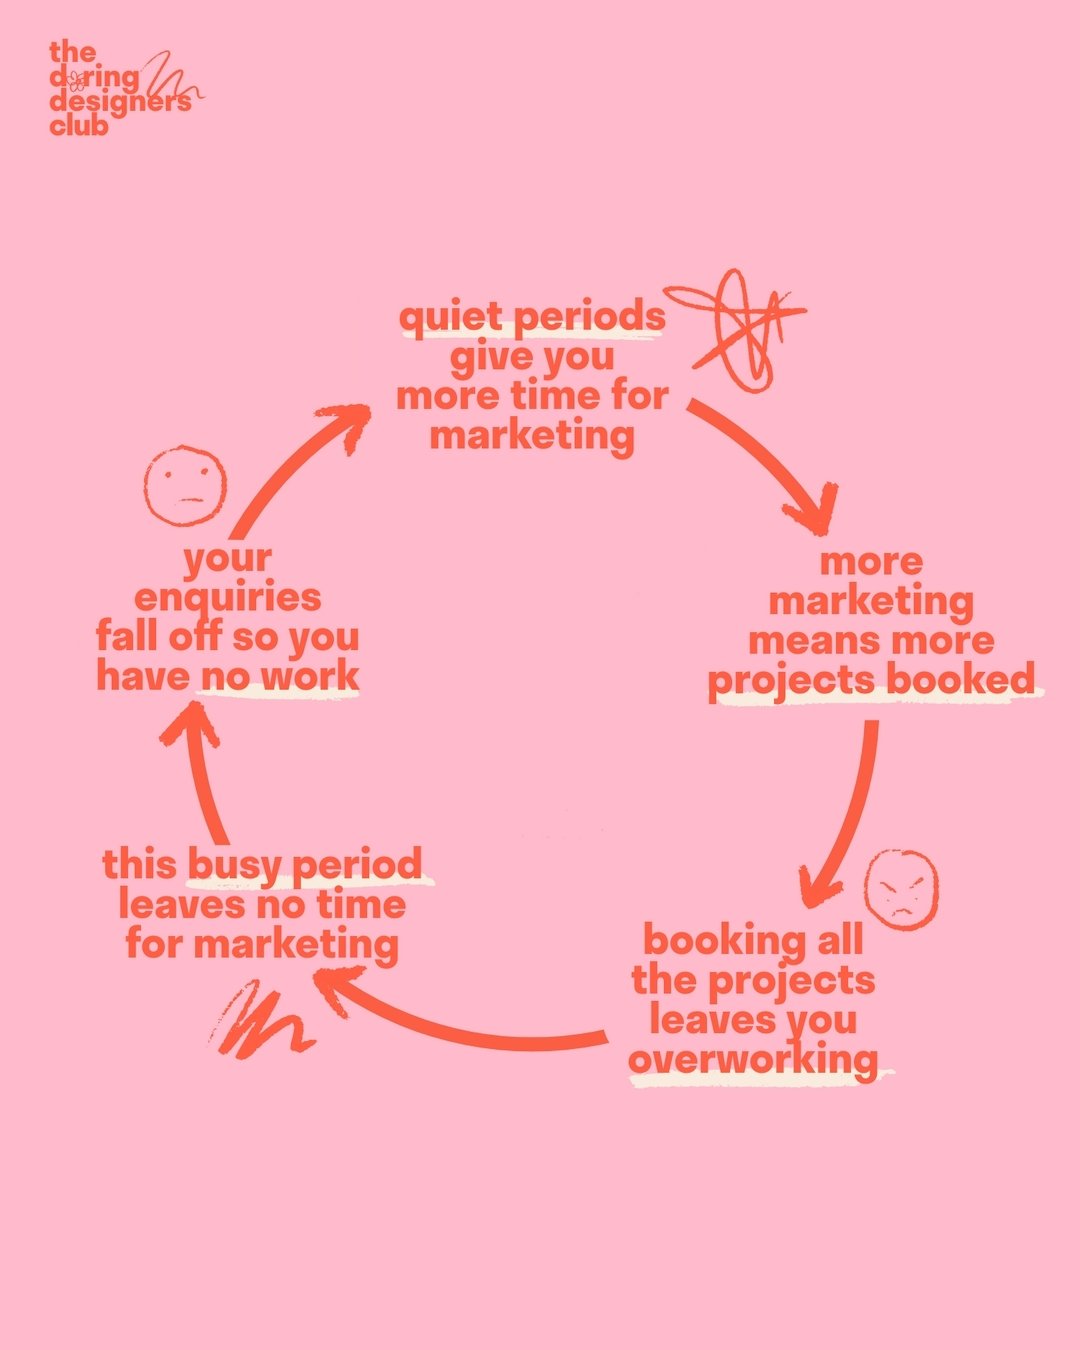 📣 Your feast &amp; famine cycle is inevitable! 📣

If you are a designer who is stuck in feast &amp; famine, similar to the vicious circle above, all of this may feel eerily familiar to you 🔮

You get a wave of enquiries which gives you a boost of 